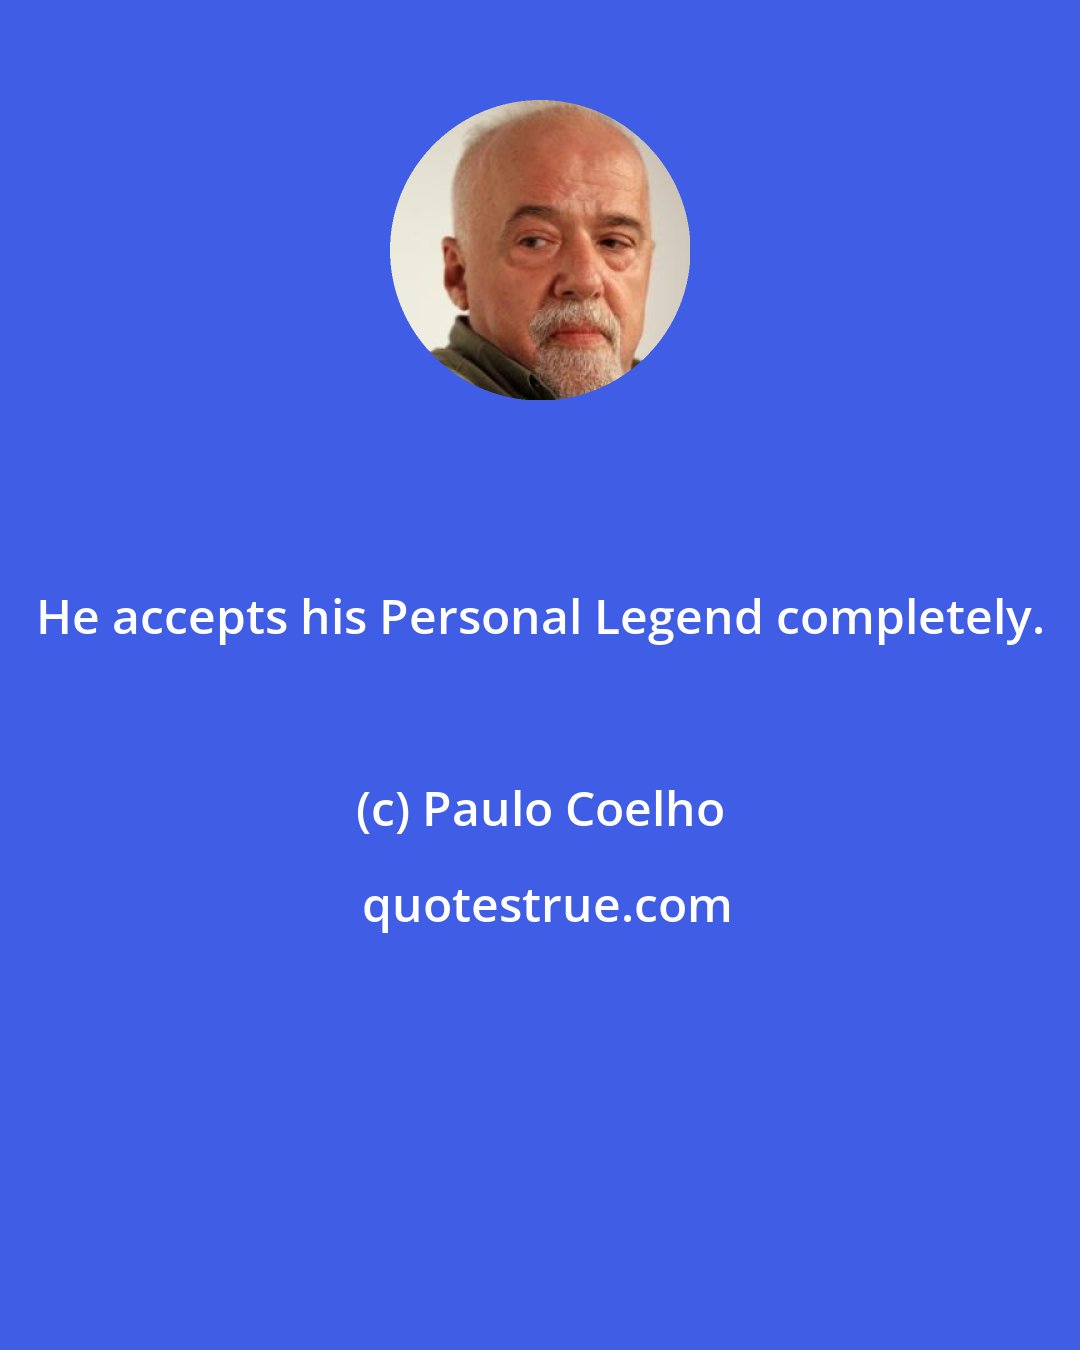 Paulo Coelho: He accepts his Personal Legend completely.